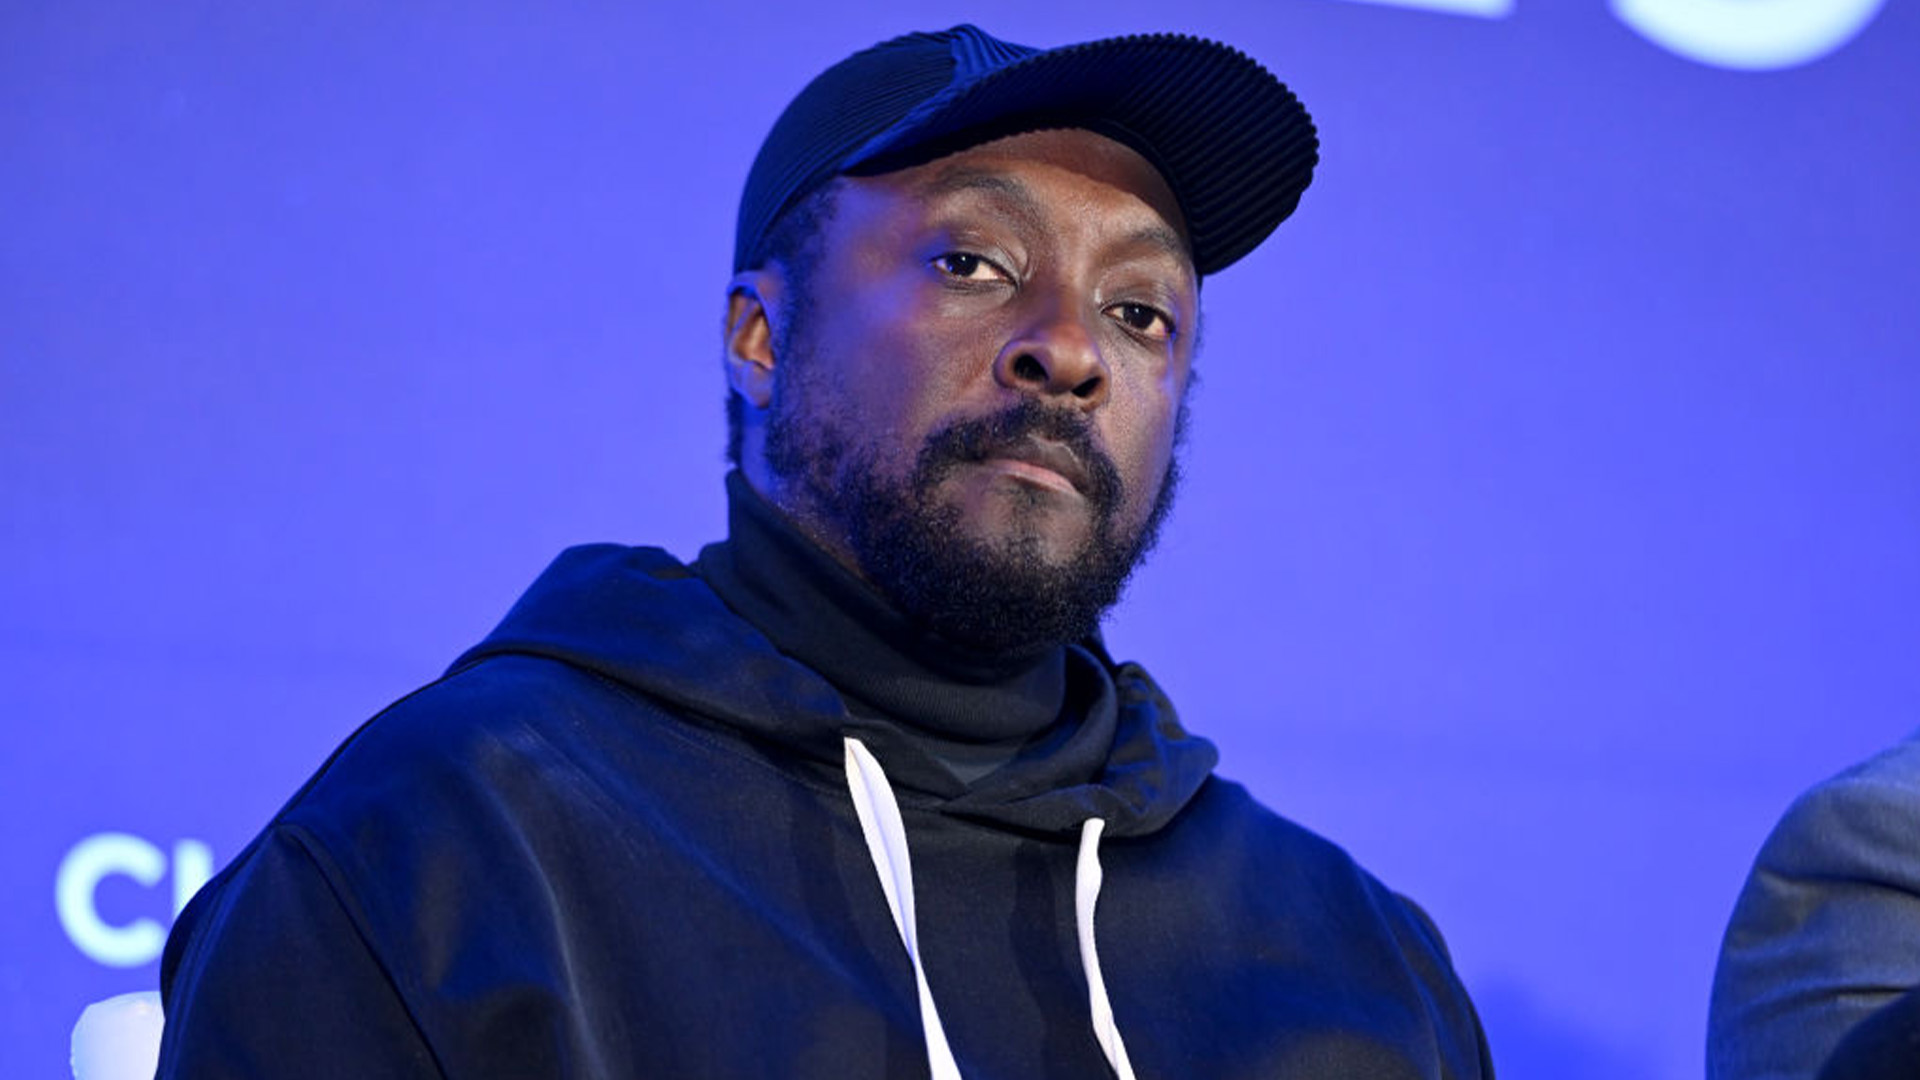 Will.i.am Says He Is Set To Graduate From Harvard Business School — 'This Will Be My First Time Walking The Stage'